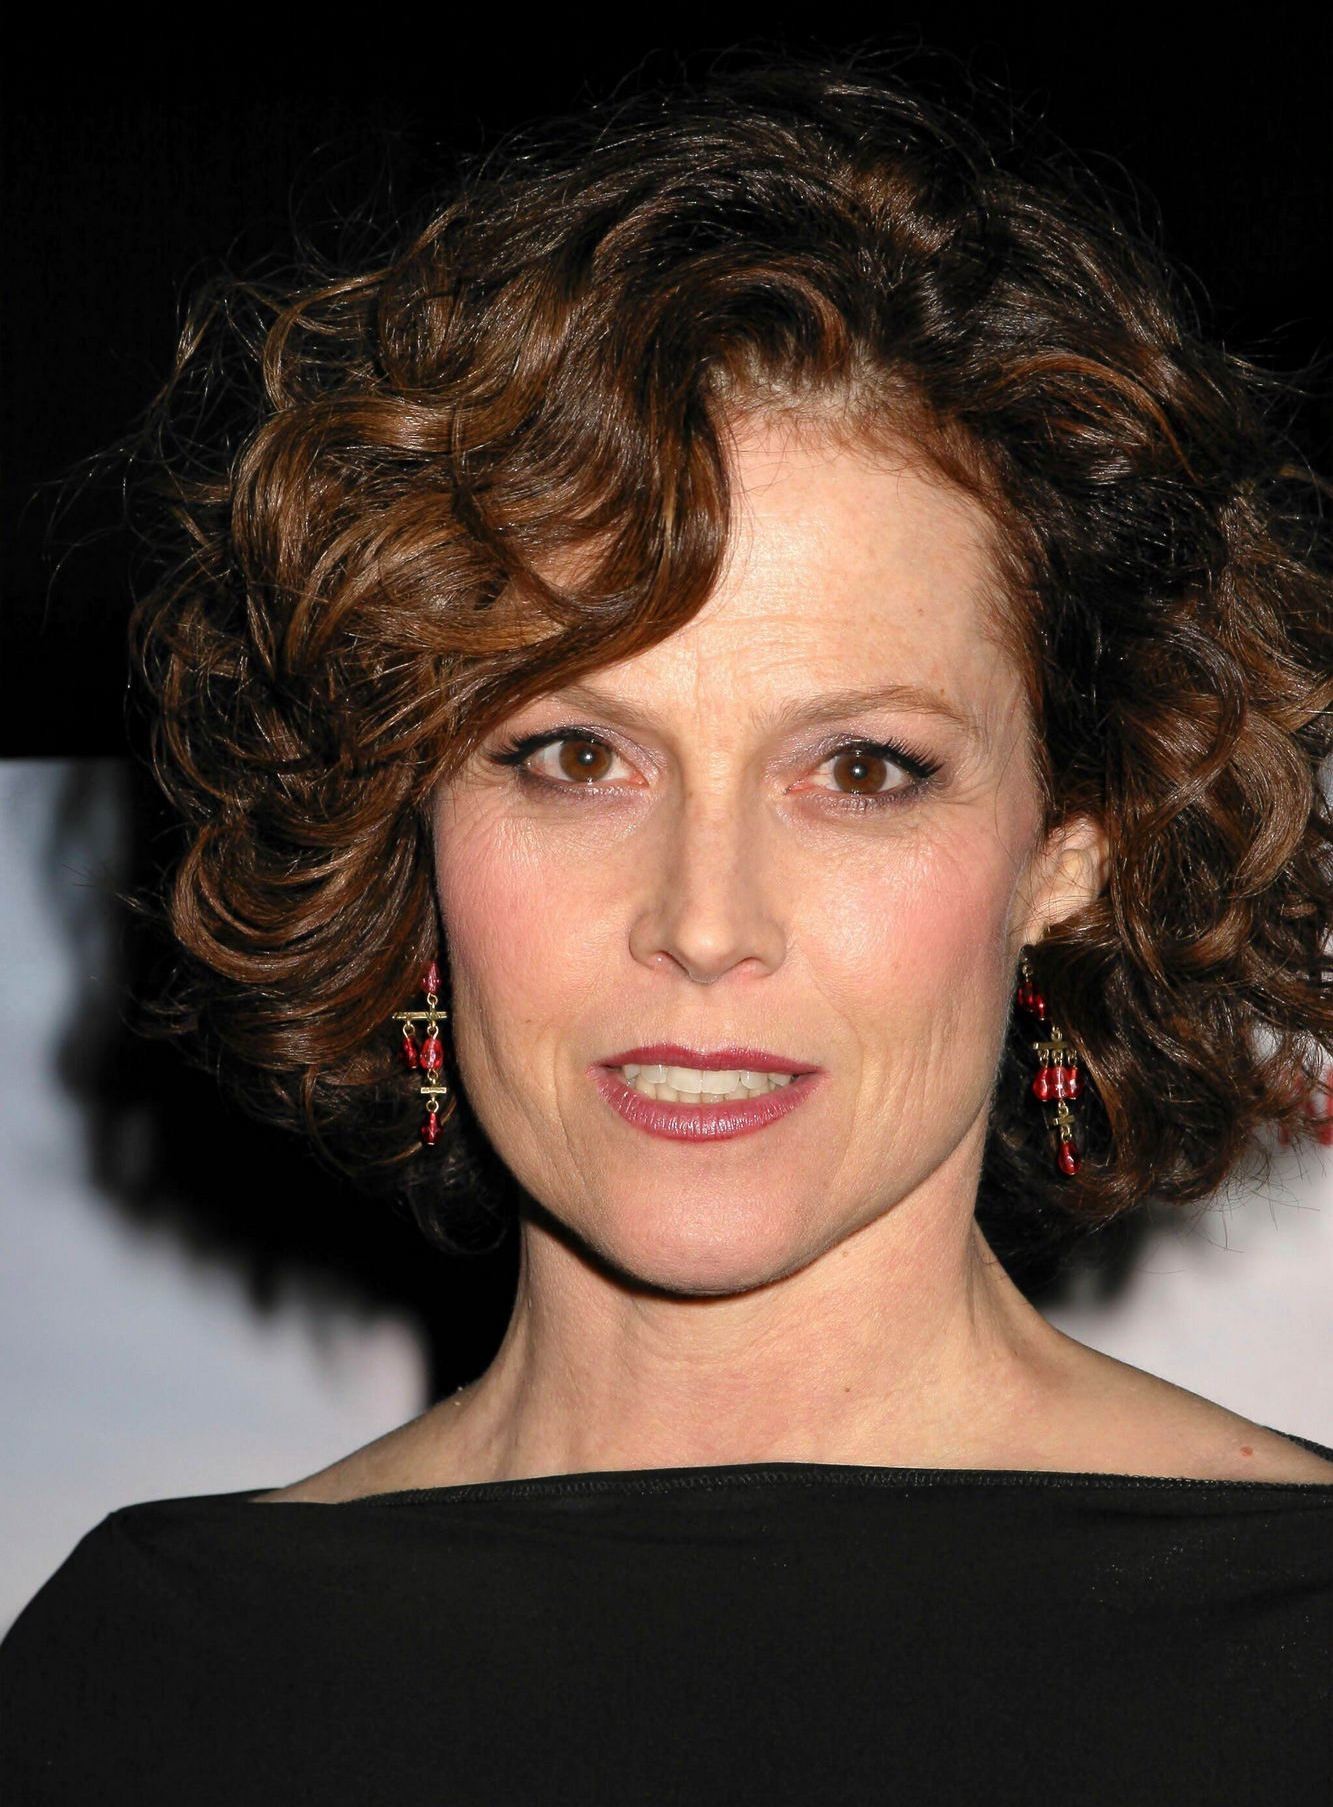 Sigourney Weaver Wallpaper For Pc Full HD Pictures